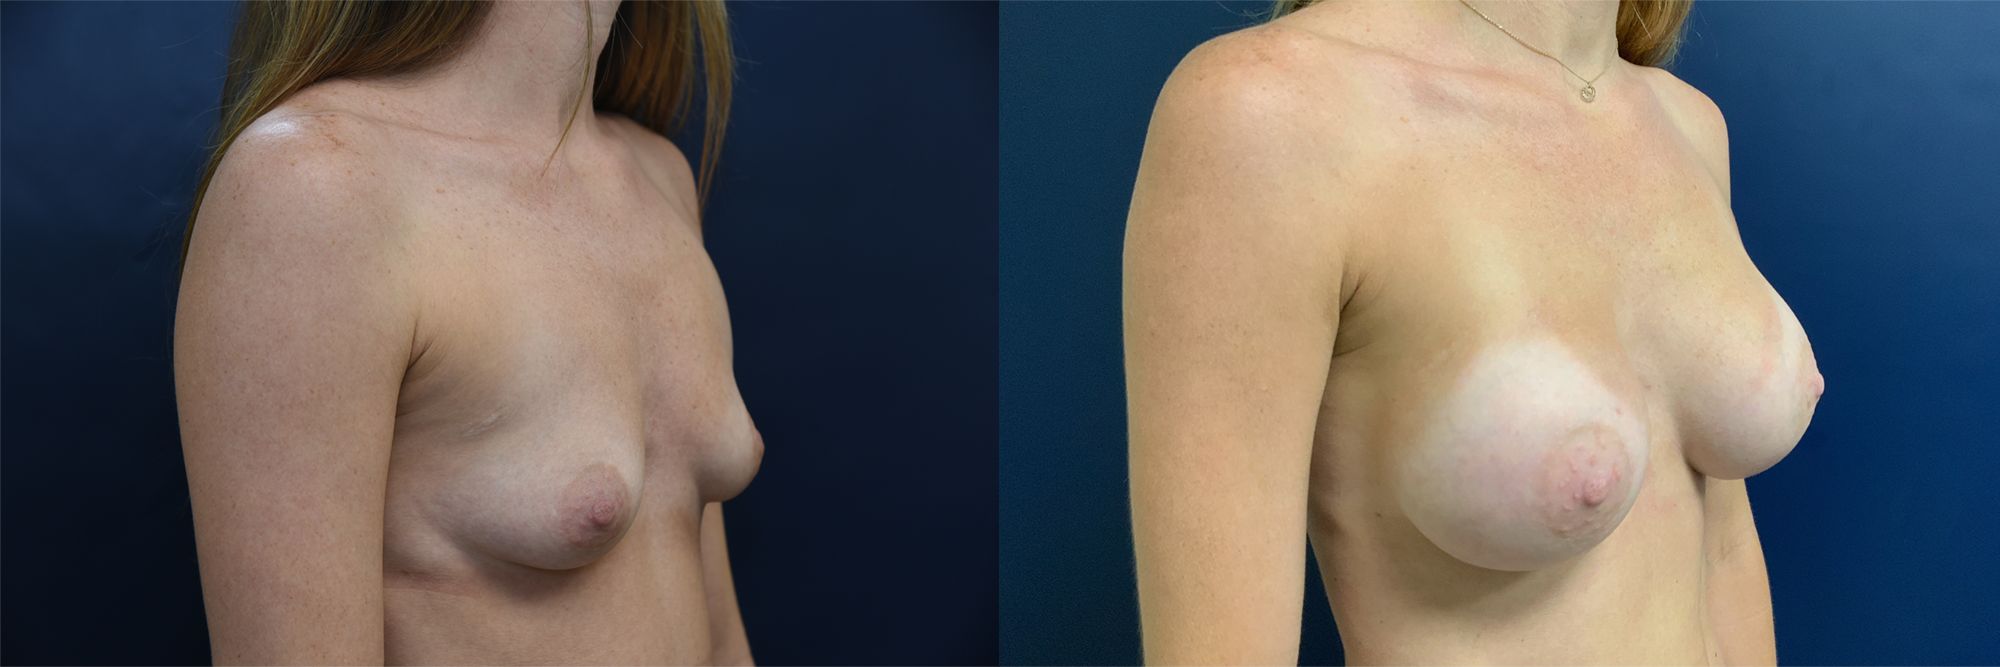 Breast Augmentation Before and After Photo by Dr. Leveque of Gulf Coast Plastic Surgery in Pensacola, FL